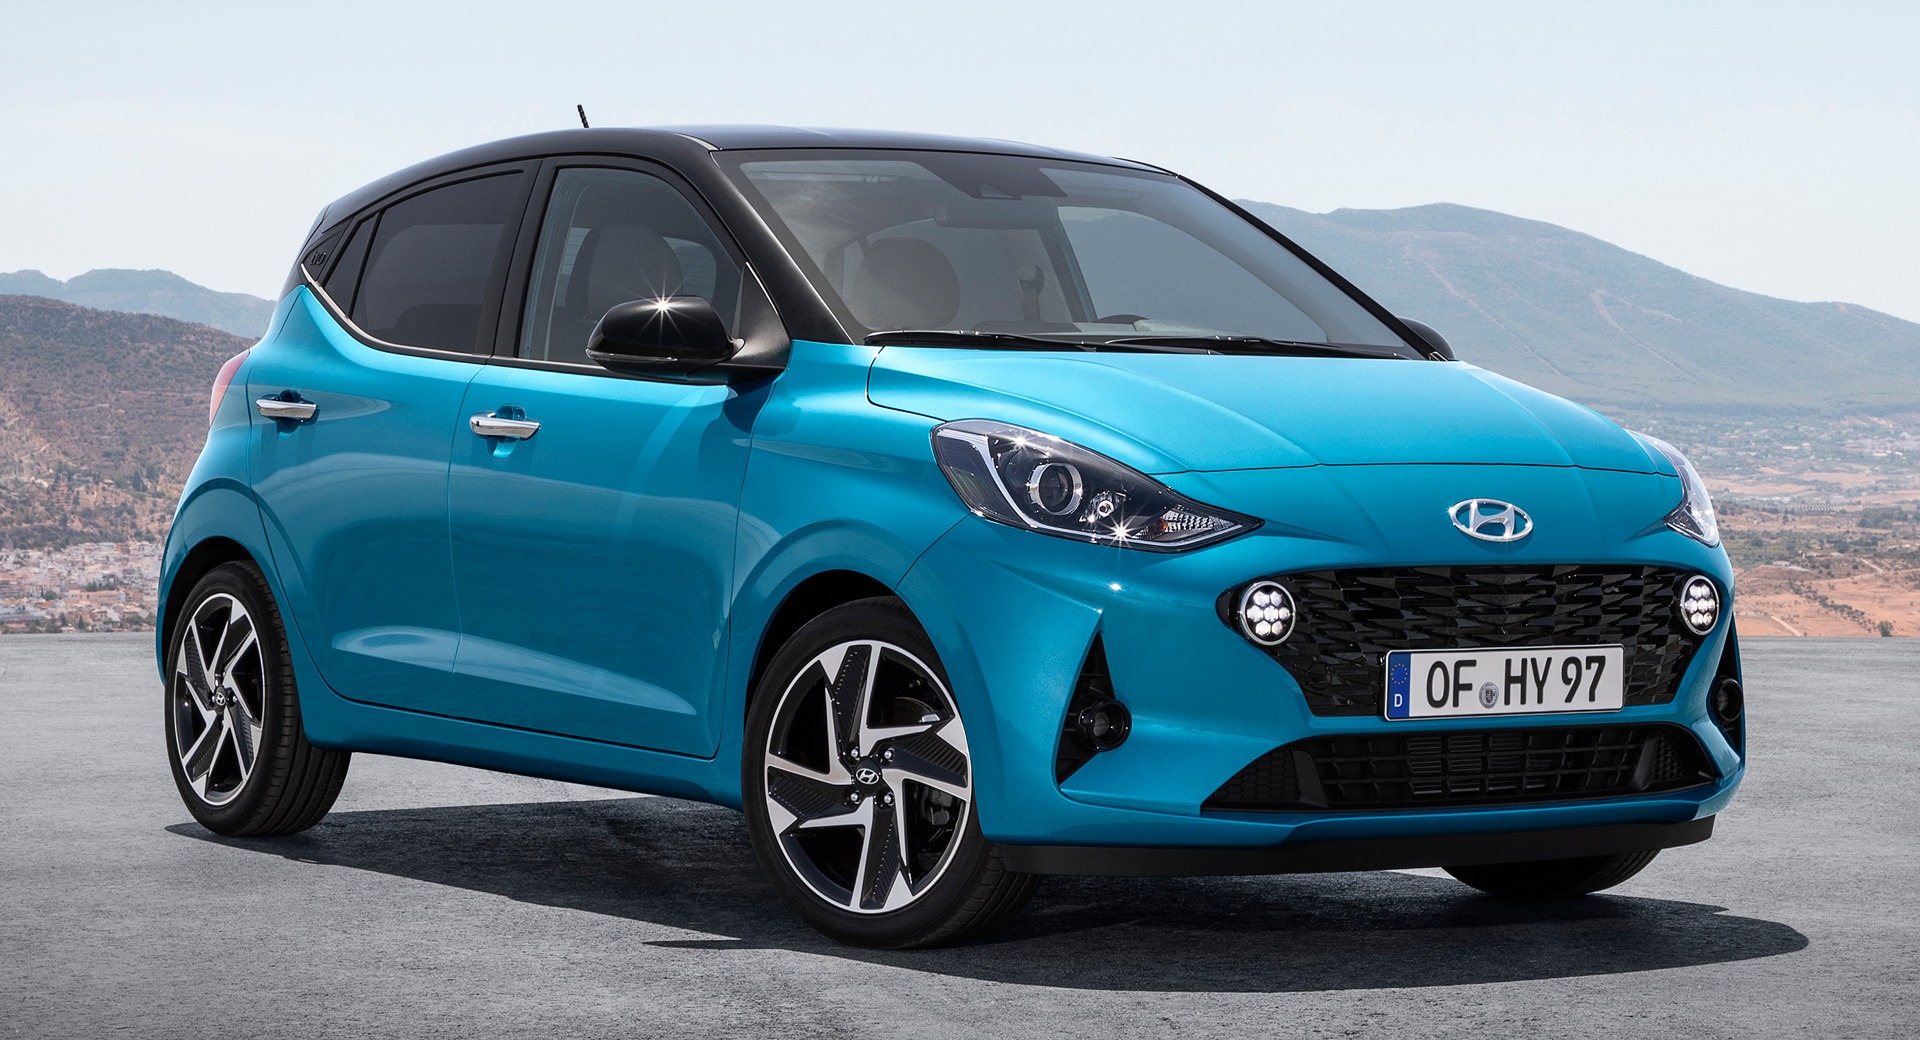 Hyundai Plans More Electric Cars, But The i10 Isn’t Among